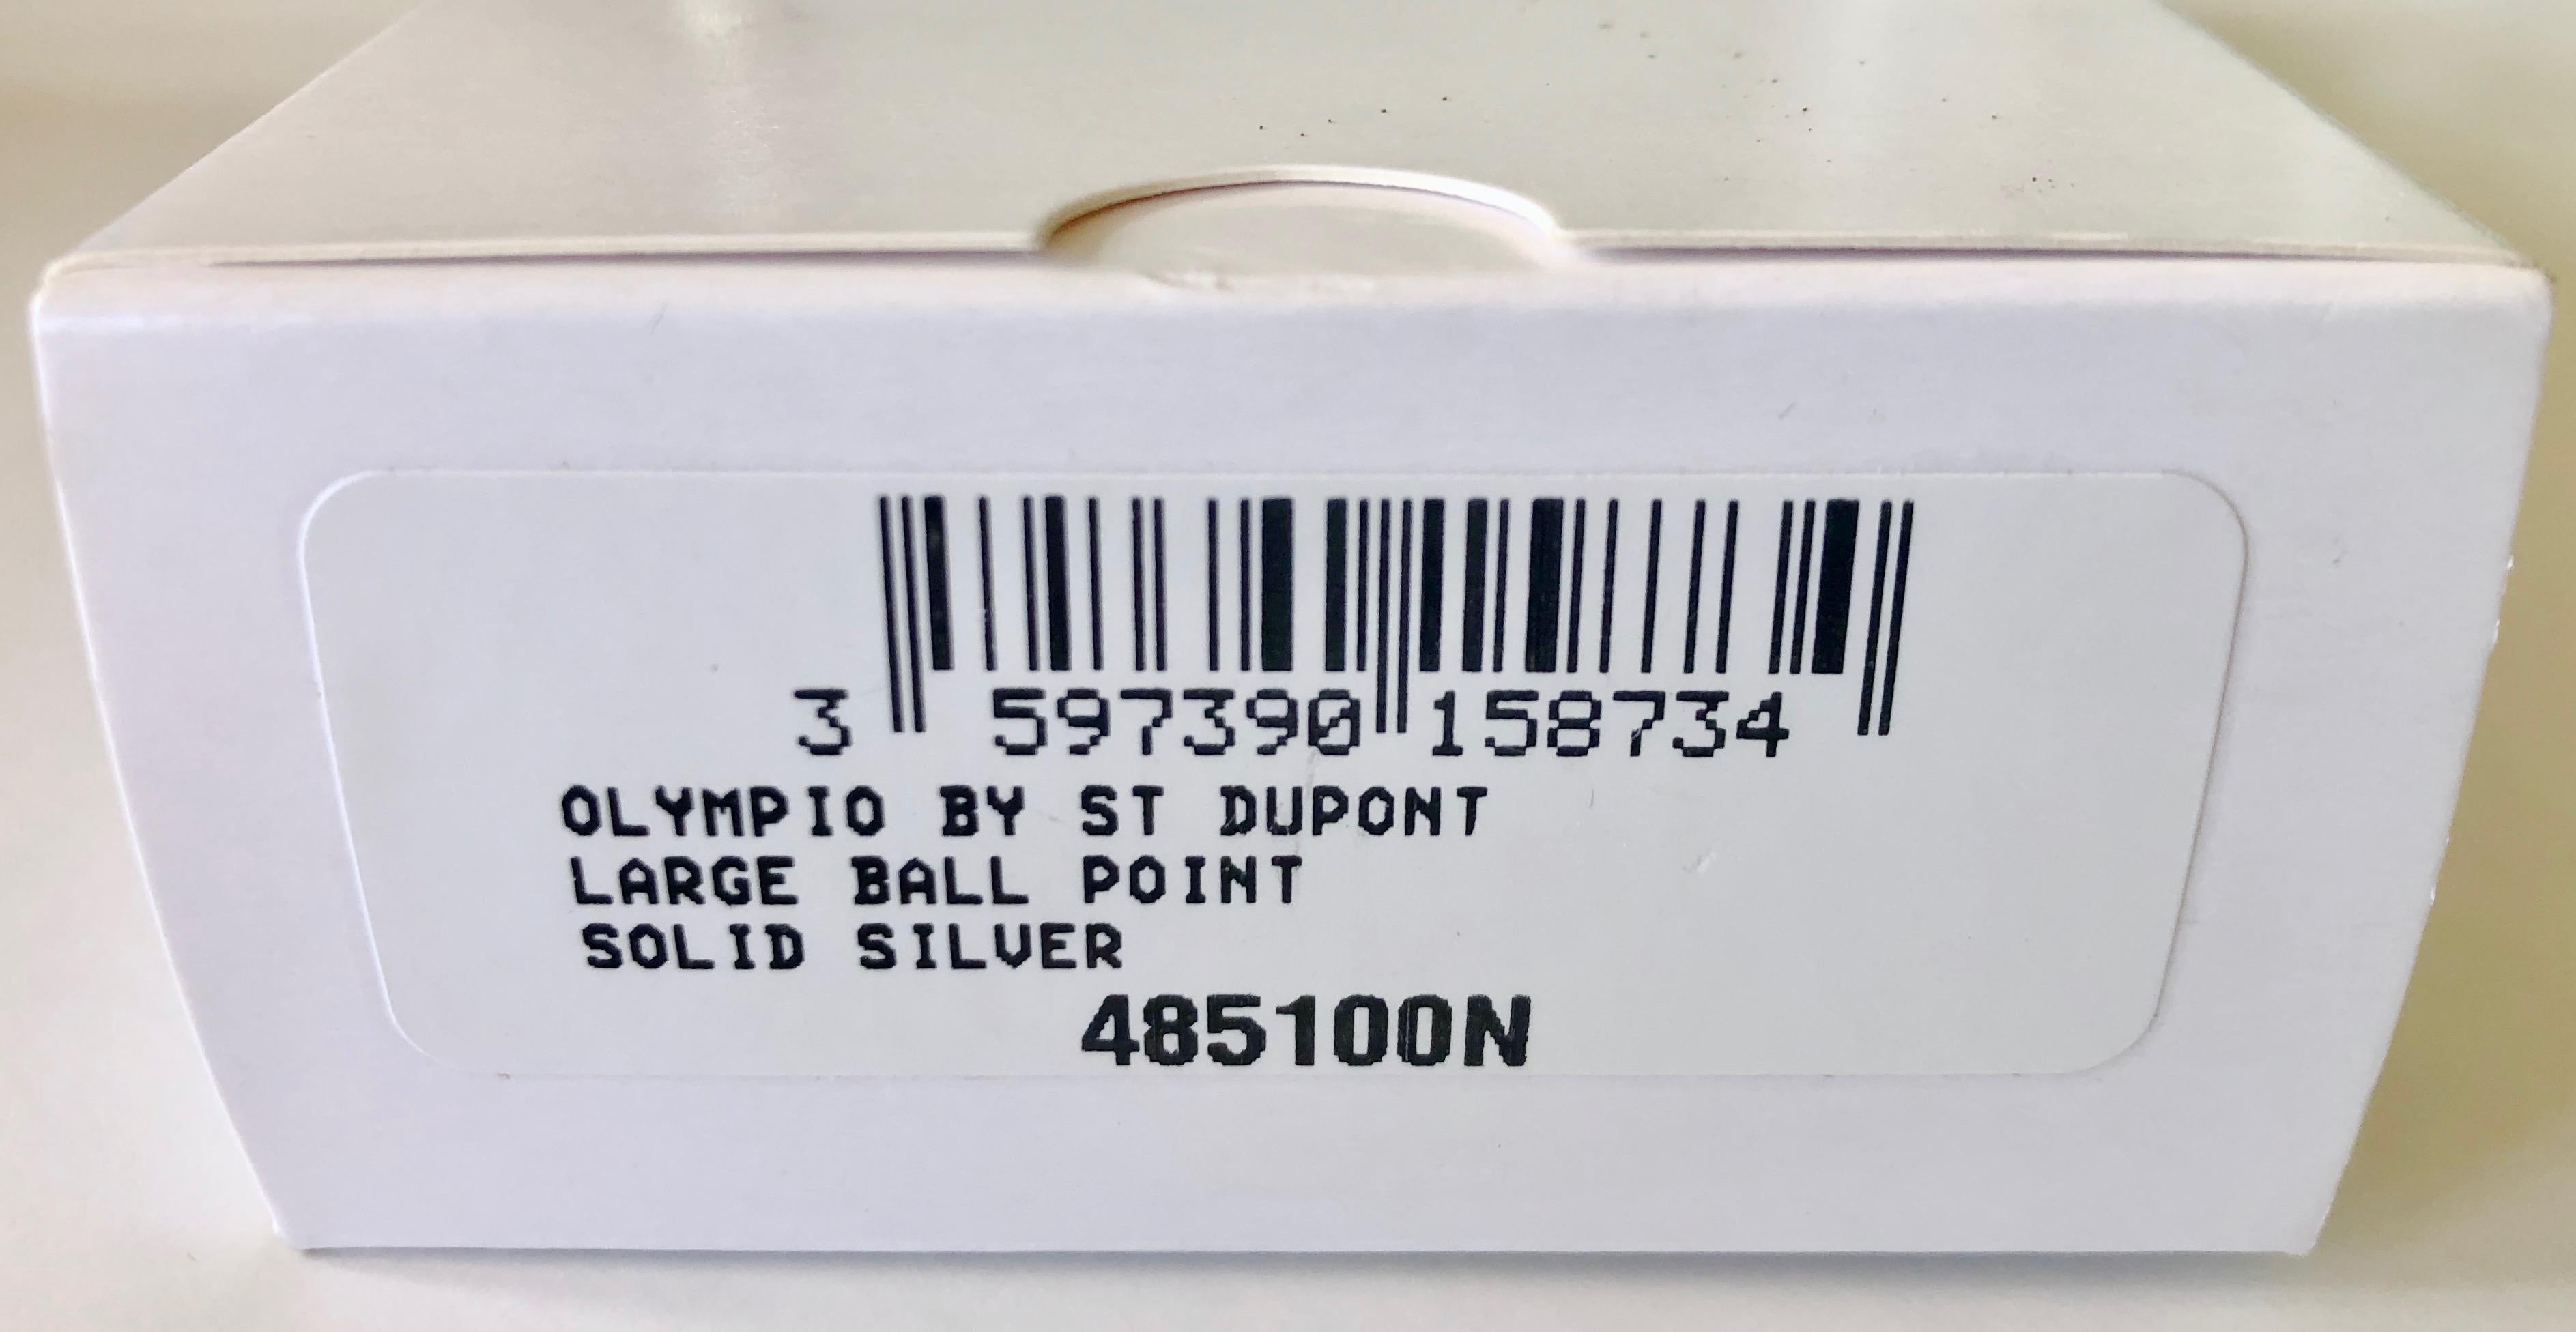 S.T. Dupont Paris Olympio Brand New Large Solid Silver Ball Point Pen in Box 5